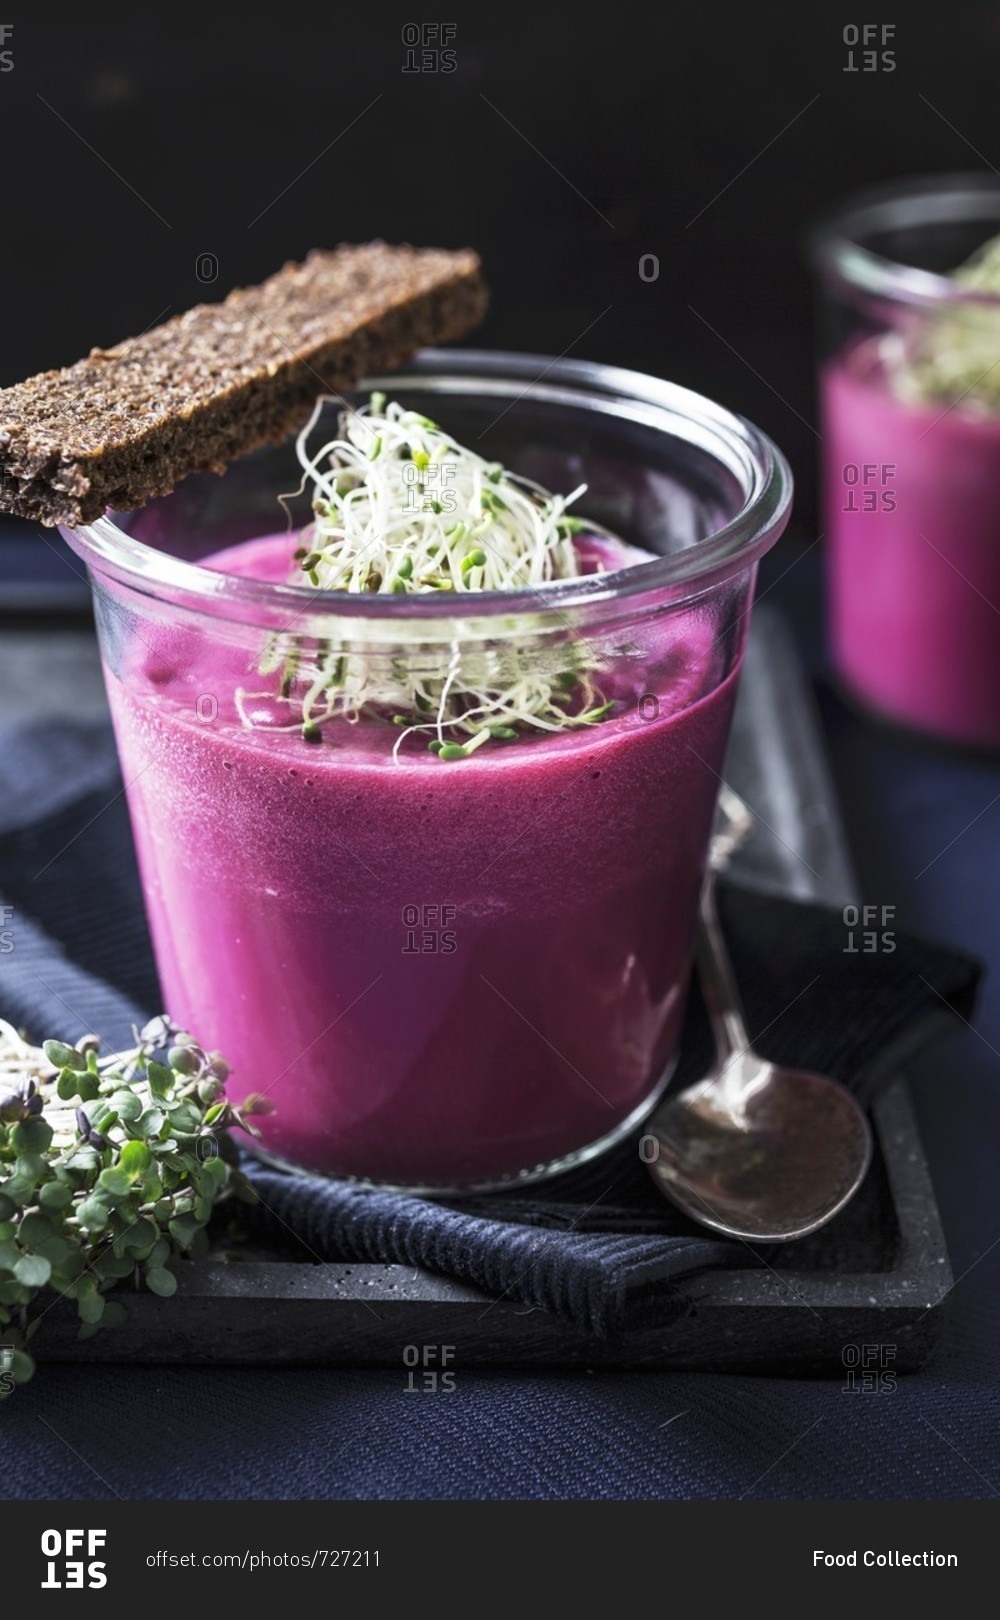 Beetroot and apple soup in a glass with onions and shoots, served with pumpernickel bread and mustard cress